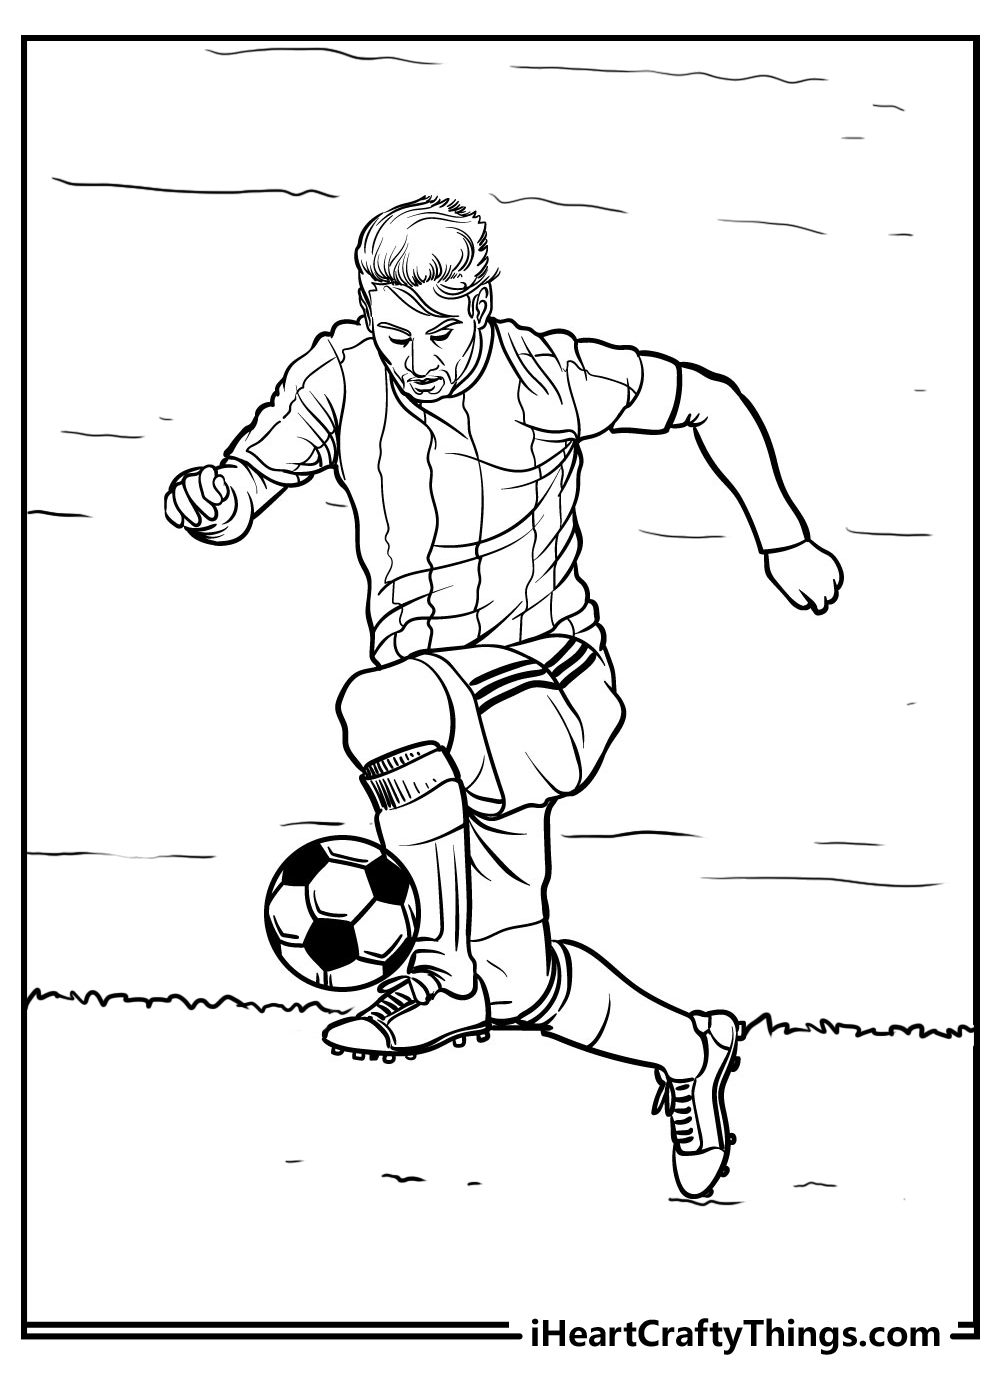 Football Coloring Pages Updated 20